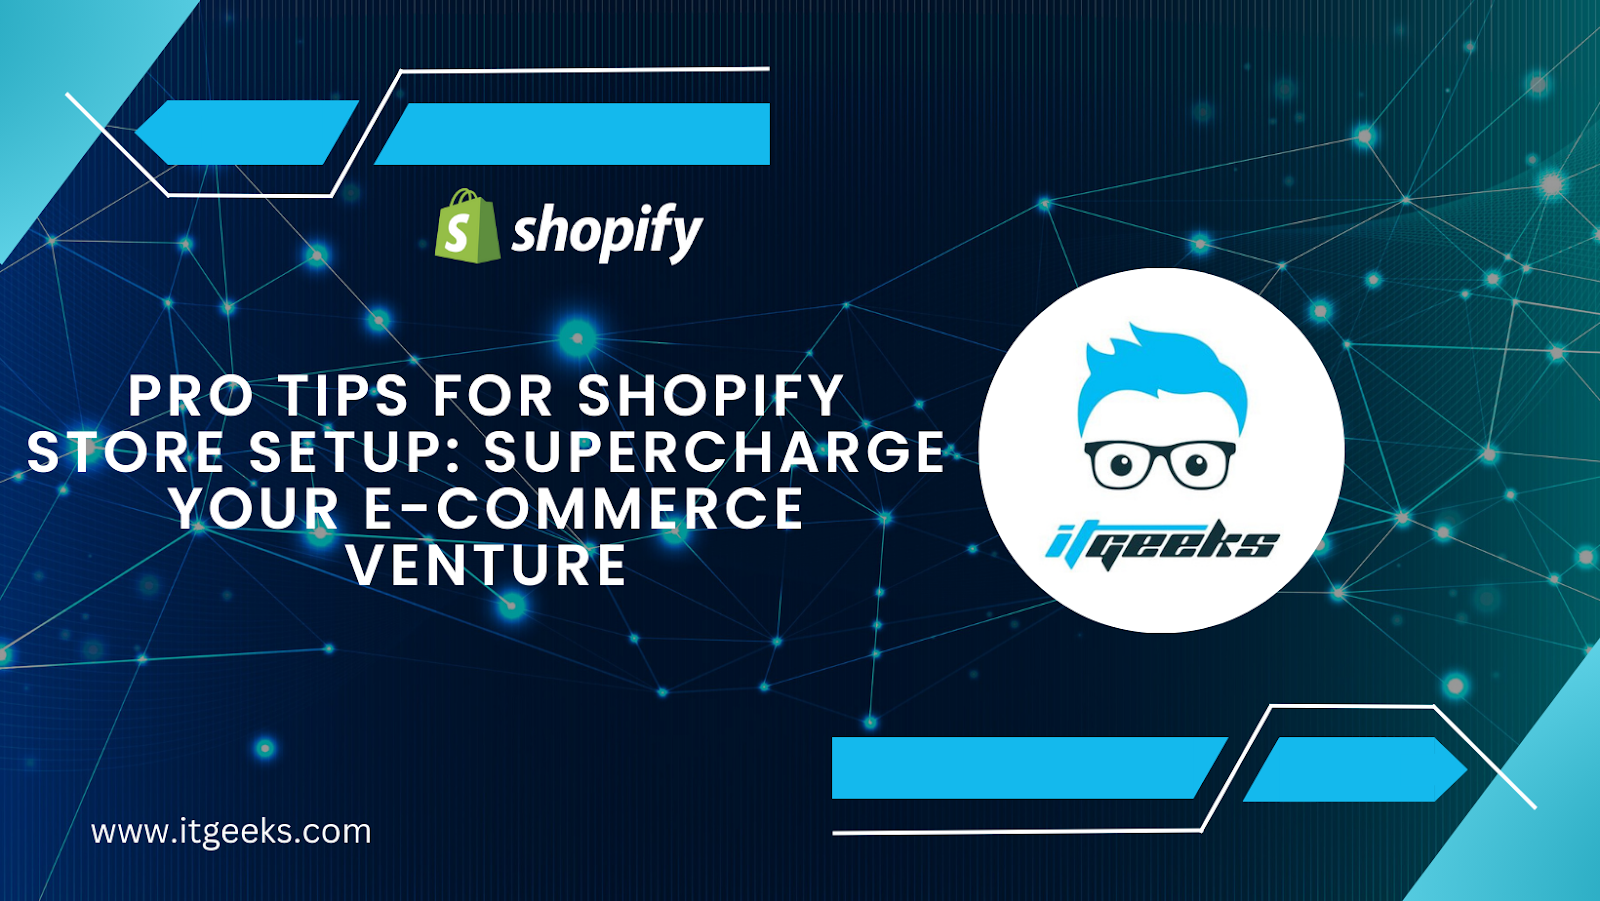 Top Reasons to Migrate from BigCommerce to Shopify